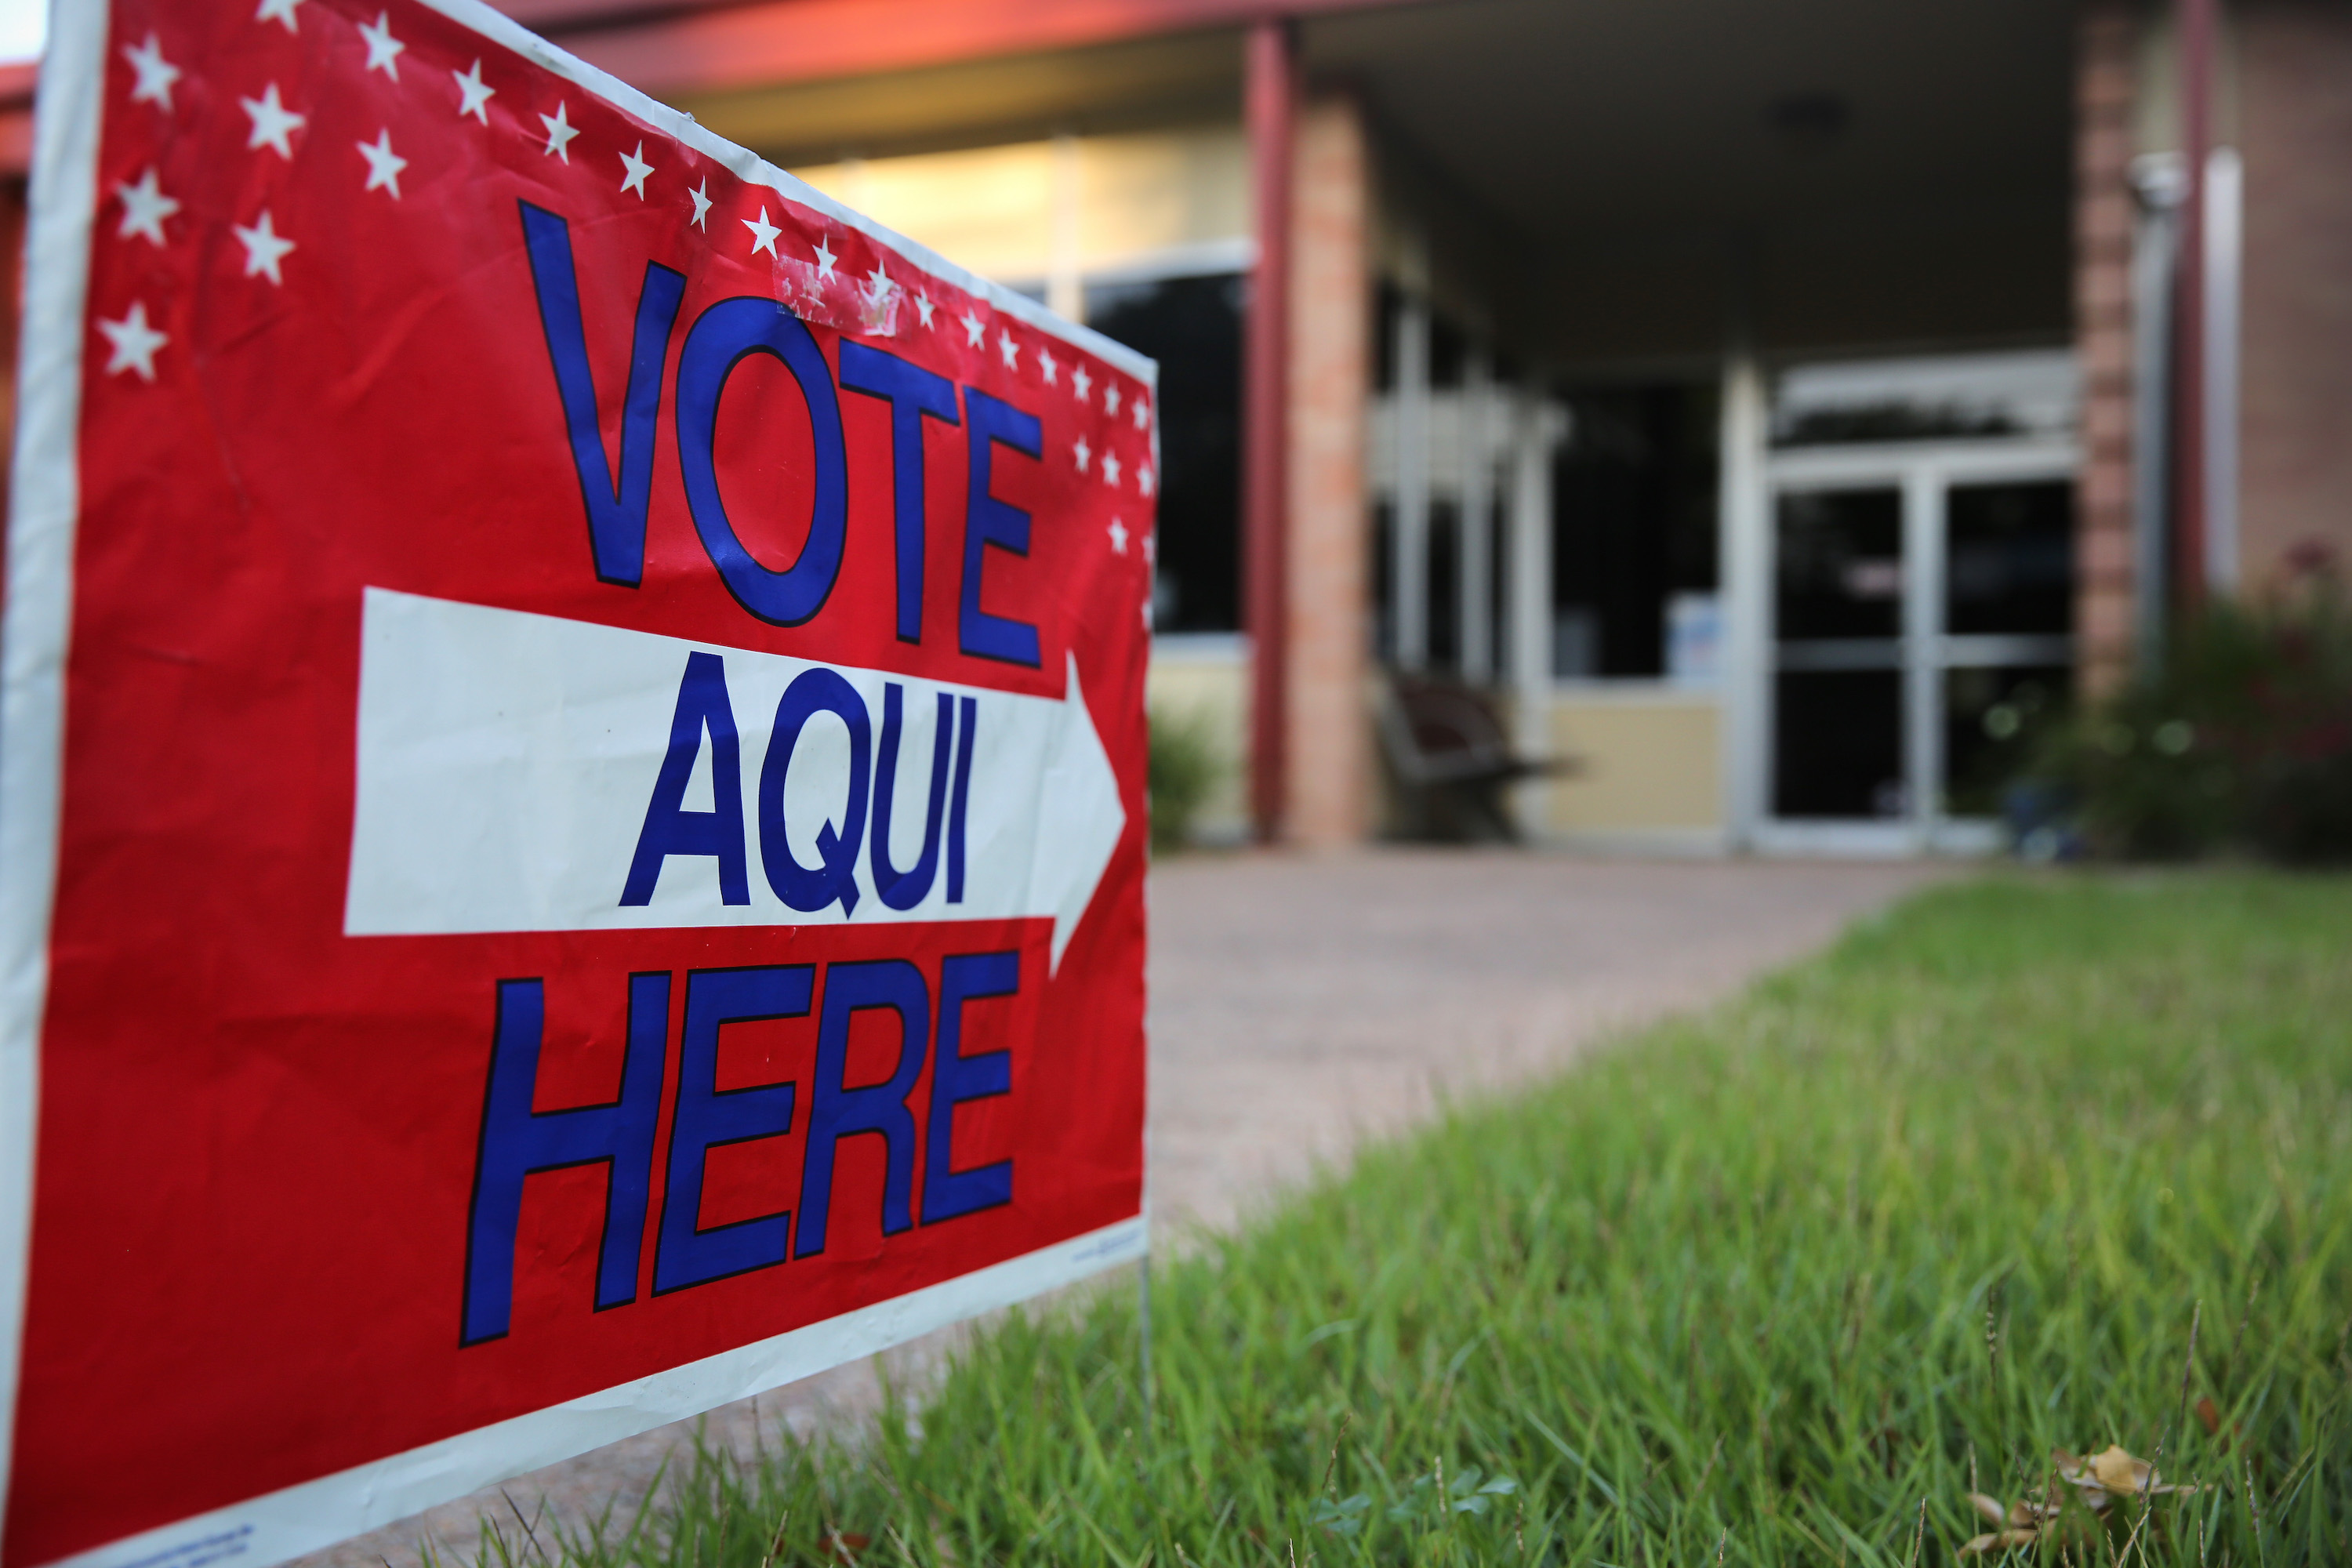 A bilingual sign stands outside a polling center at public library ahead of local elections on April 28, 2013 in Austin, Texas. Early voting was due to begin Monday ahead of May 11 statewide county elections. The Democratic and Republican parties are vying for the Latino vote nationwide following President Obama's landslide victory among Hispanic voters in the 2012 election. Photo: John Moore/Getty Images.
